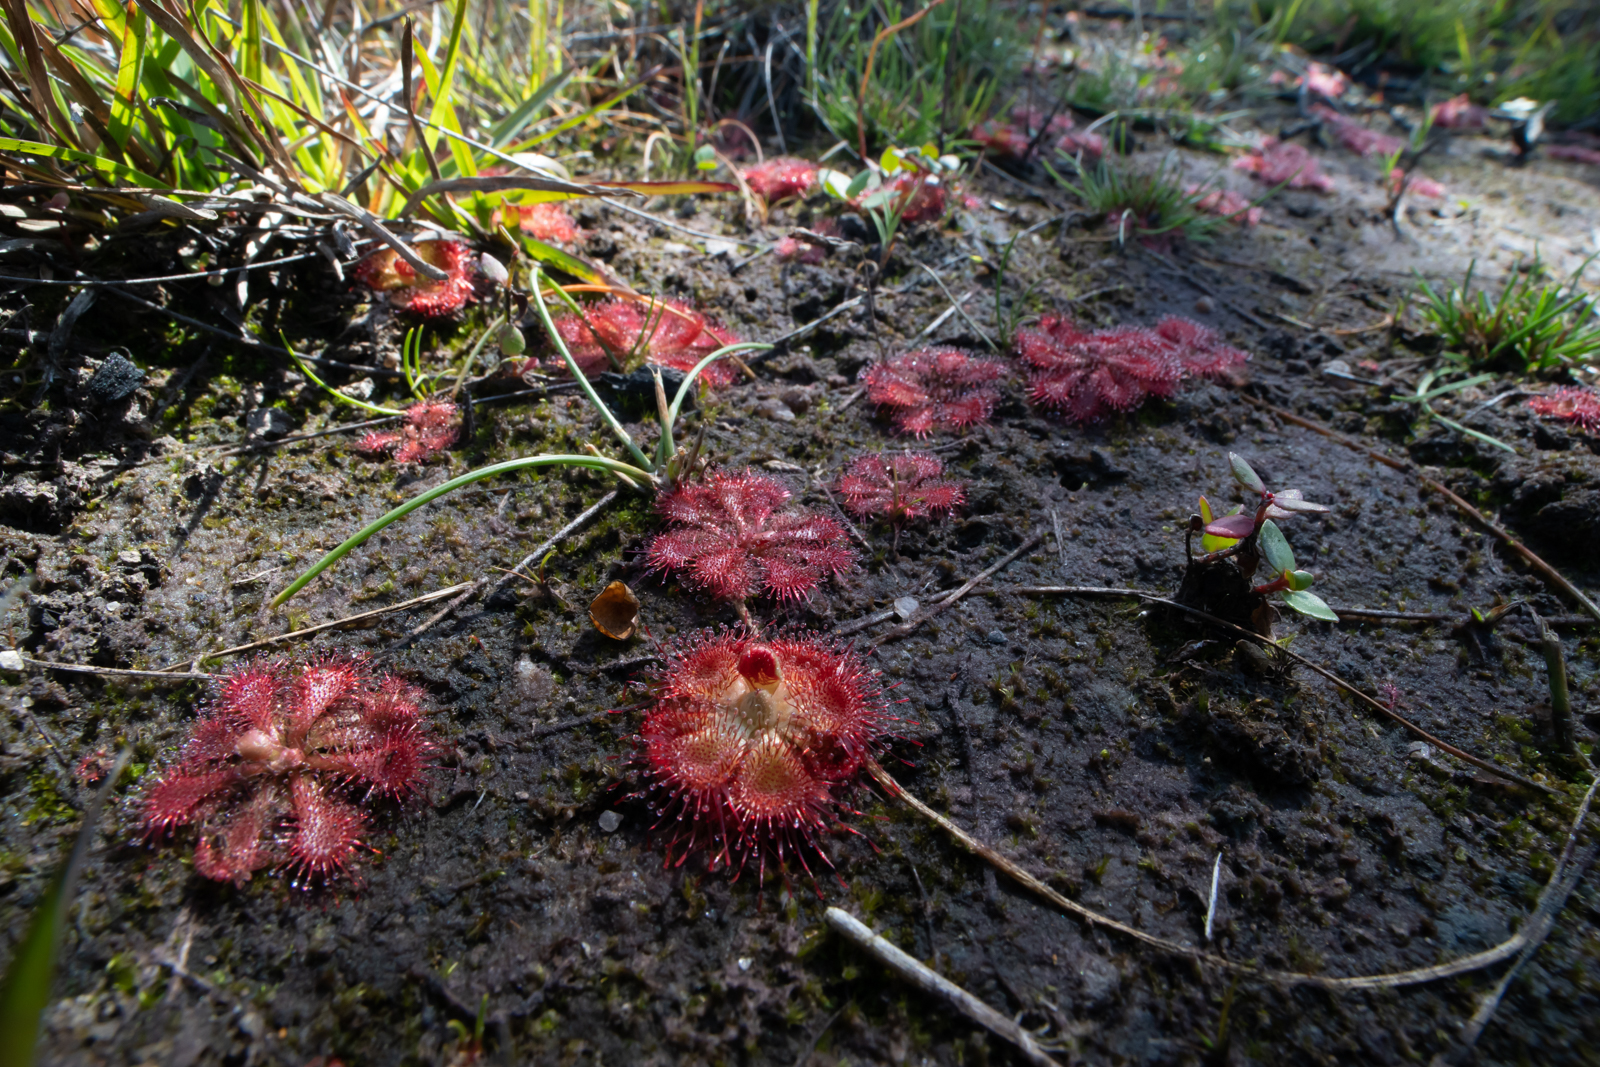 Carnivorous Plants of the Torrington State Conservation Area